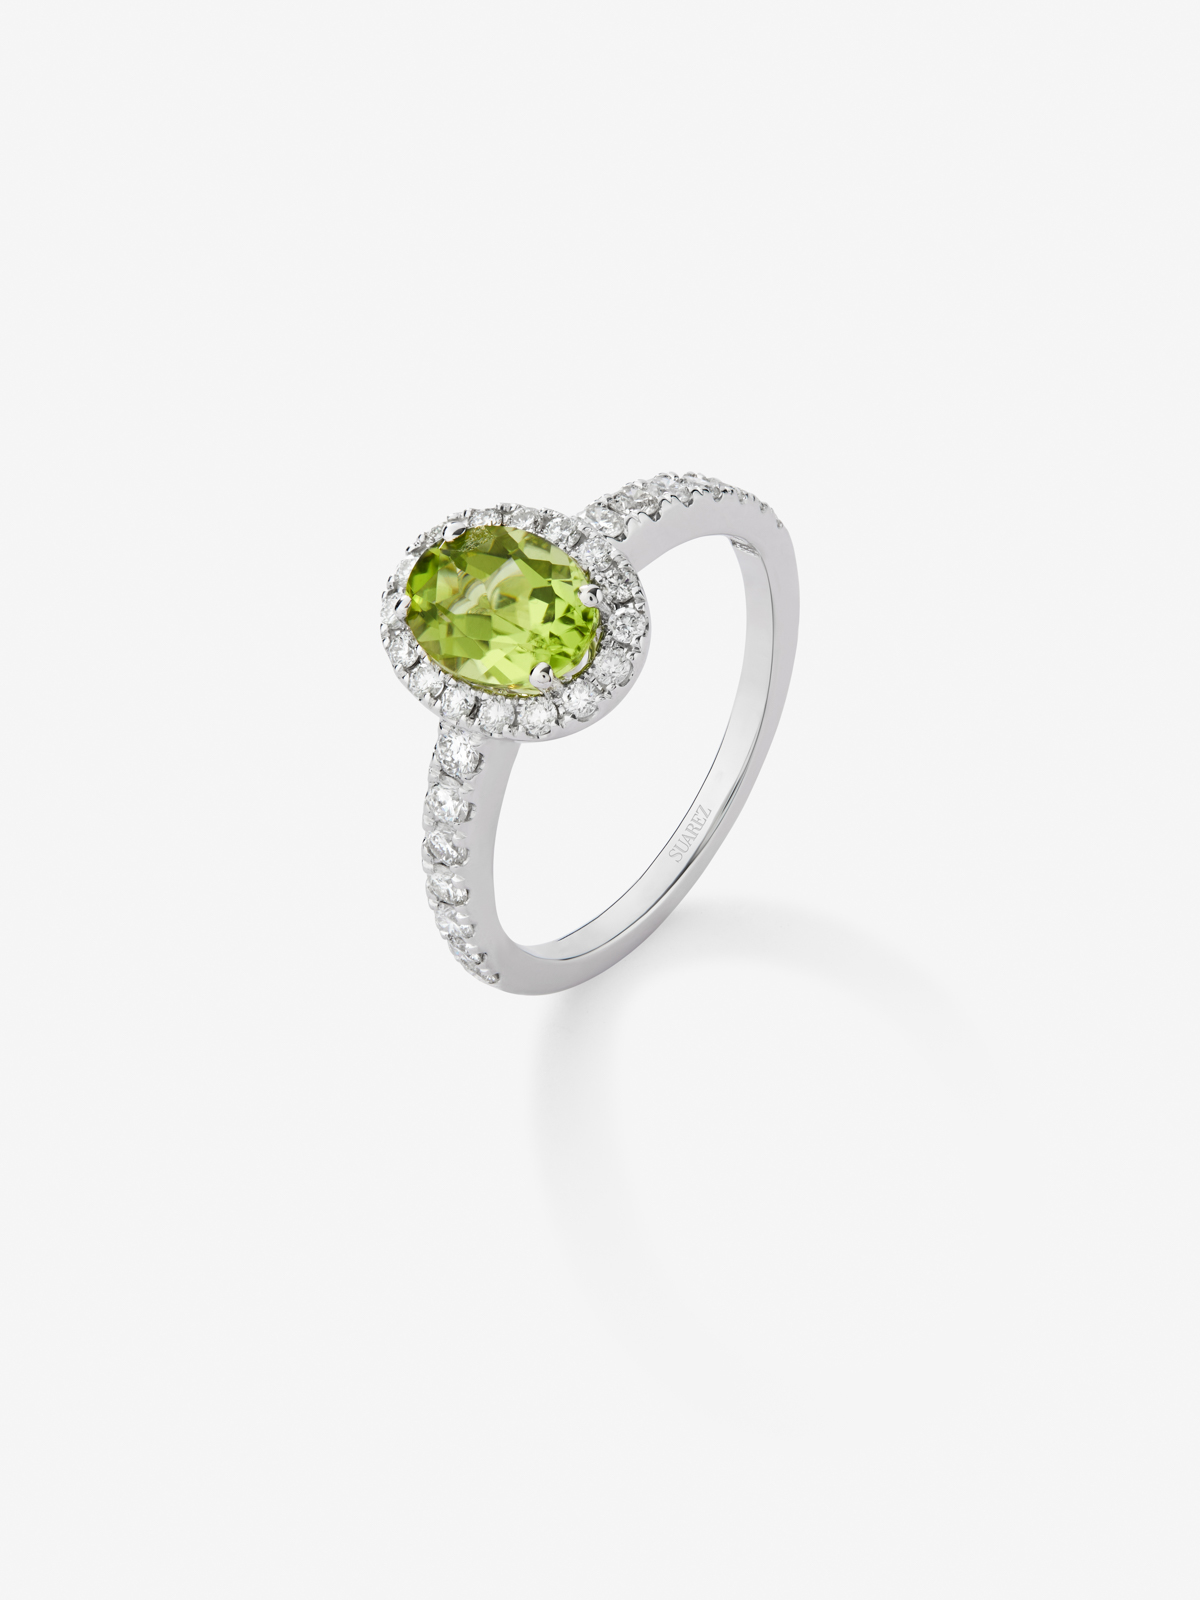 18K White Gold Ring with Green Peridoto in 1.28 cts and white diamonds in bright 0.48 cts diamonds